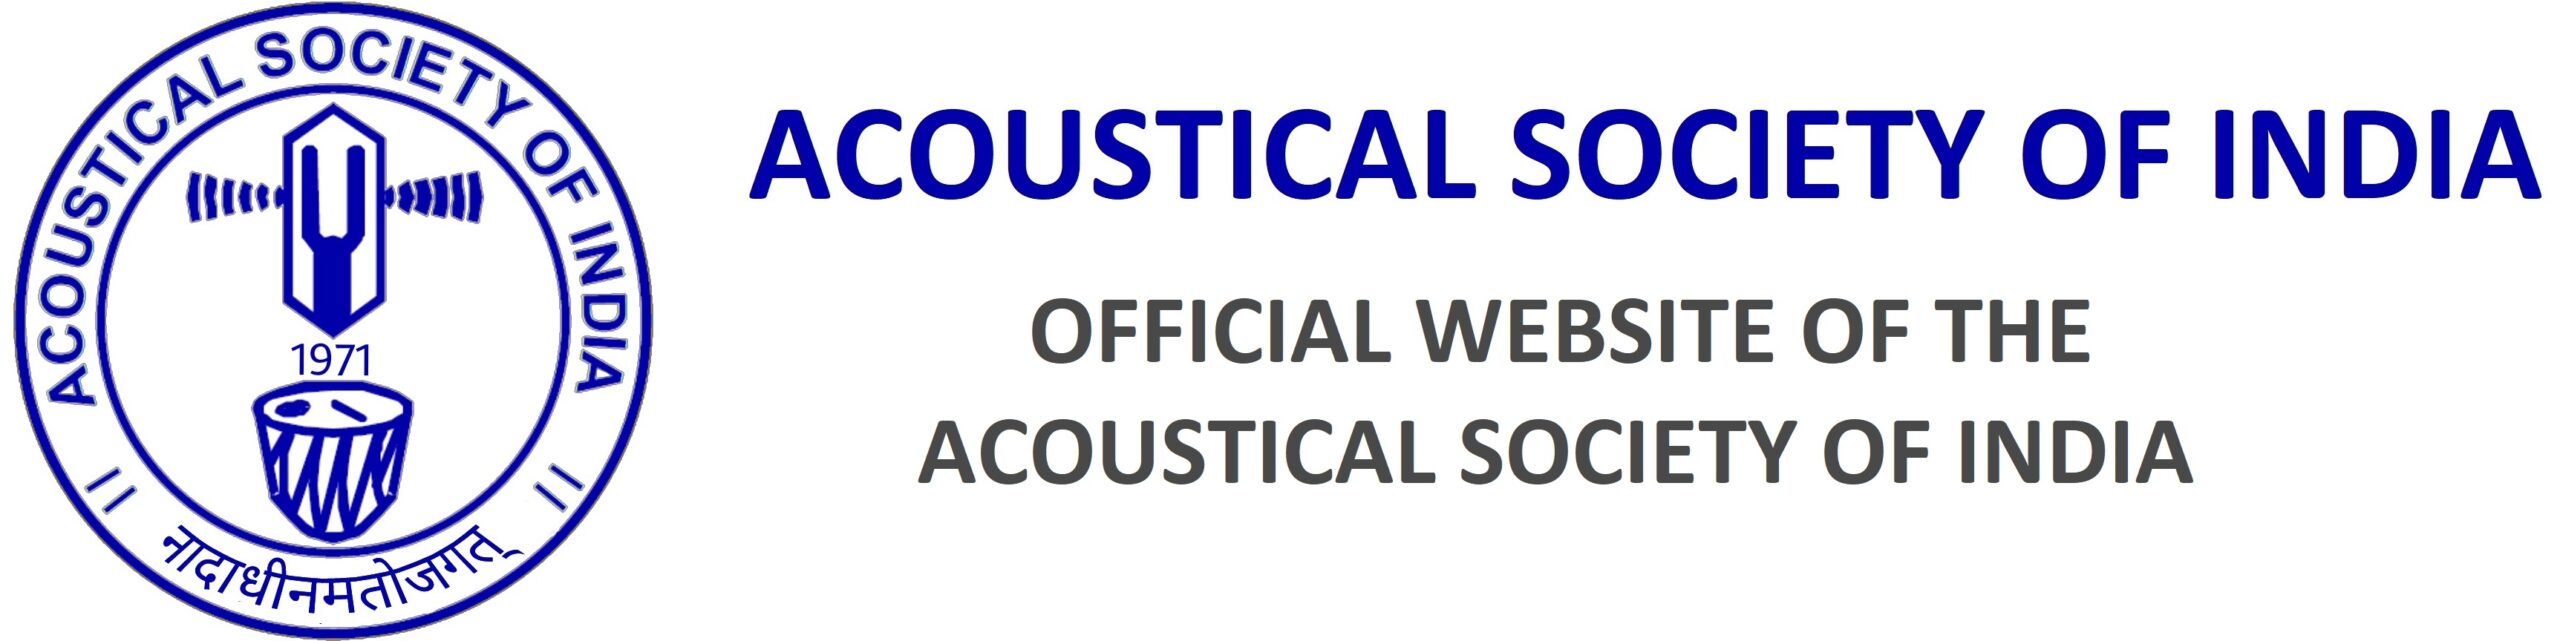 Acoustical Society of India